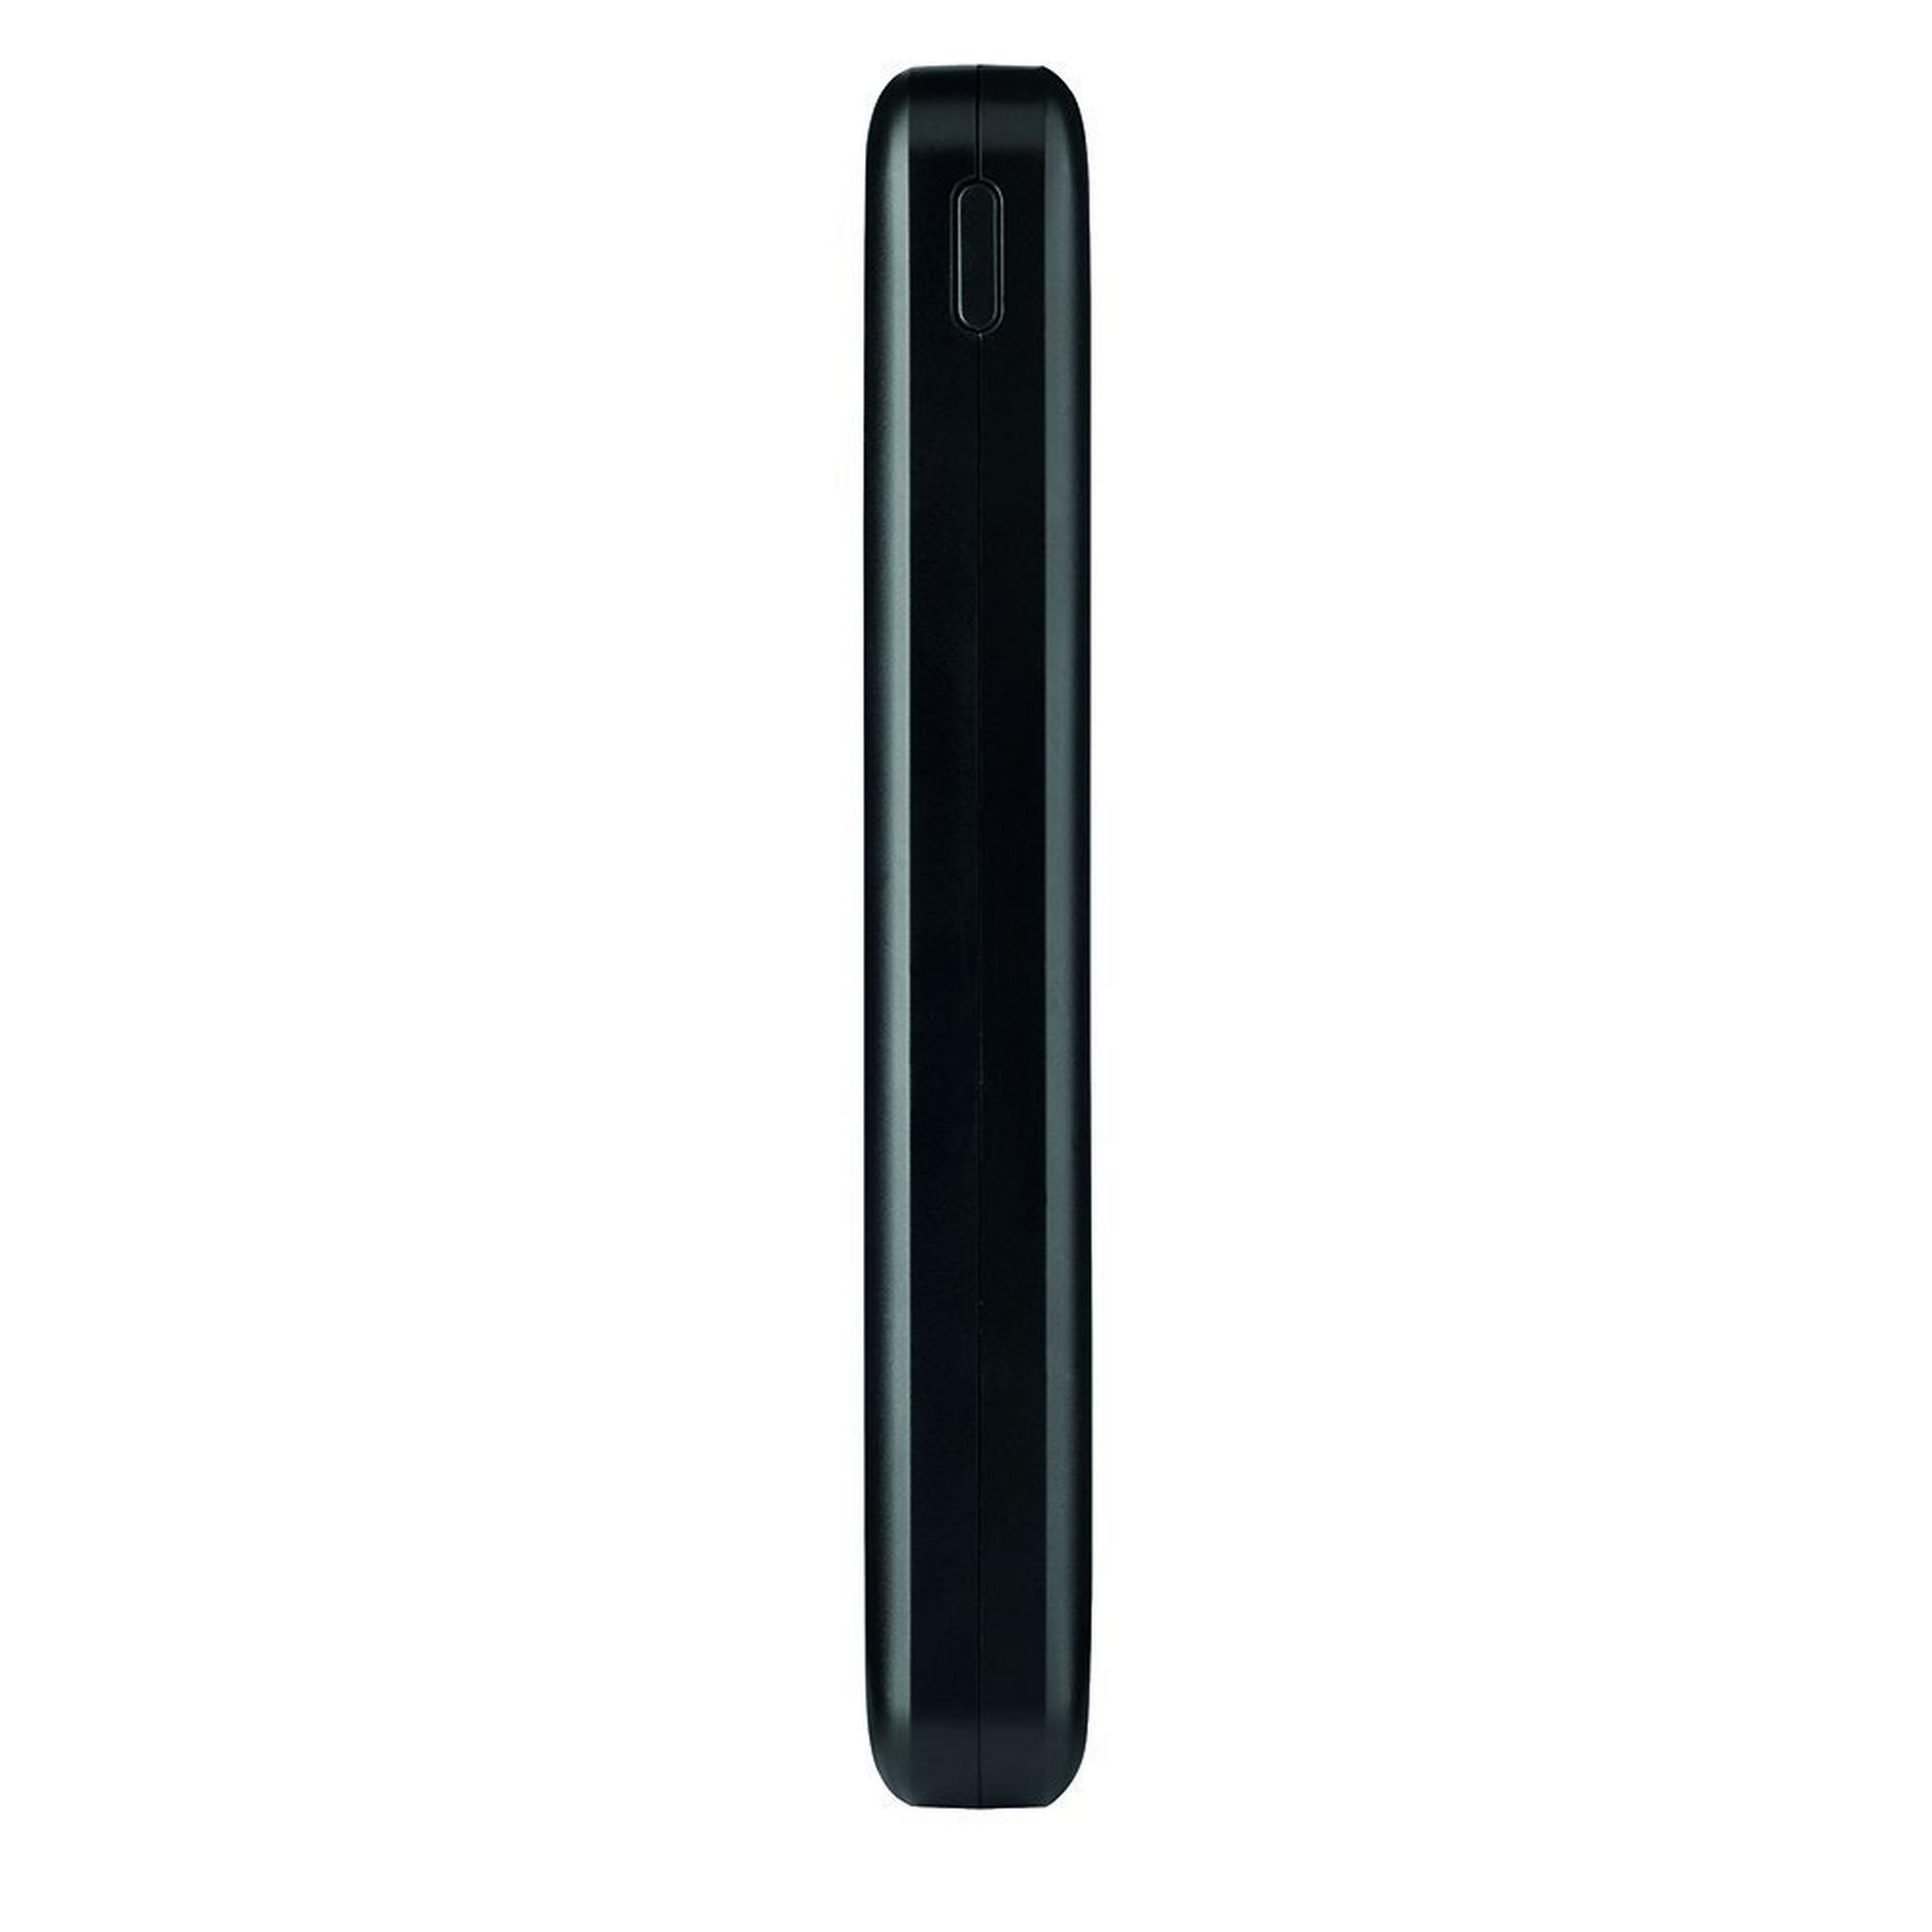 PNY Slim 20000 mAh PowerPack Portable Smartphone Battery Charger - Black